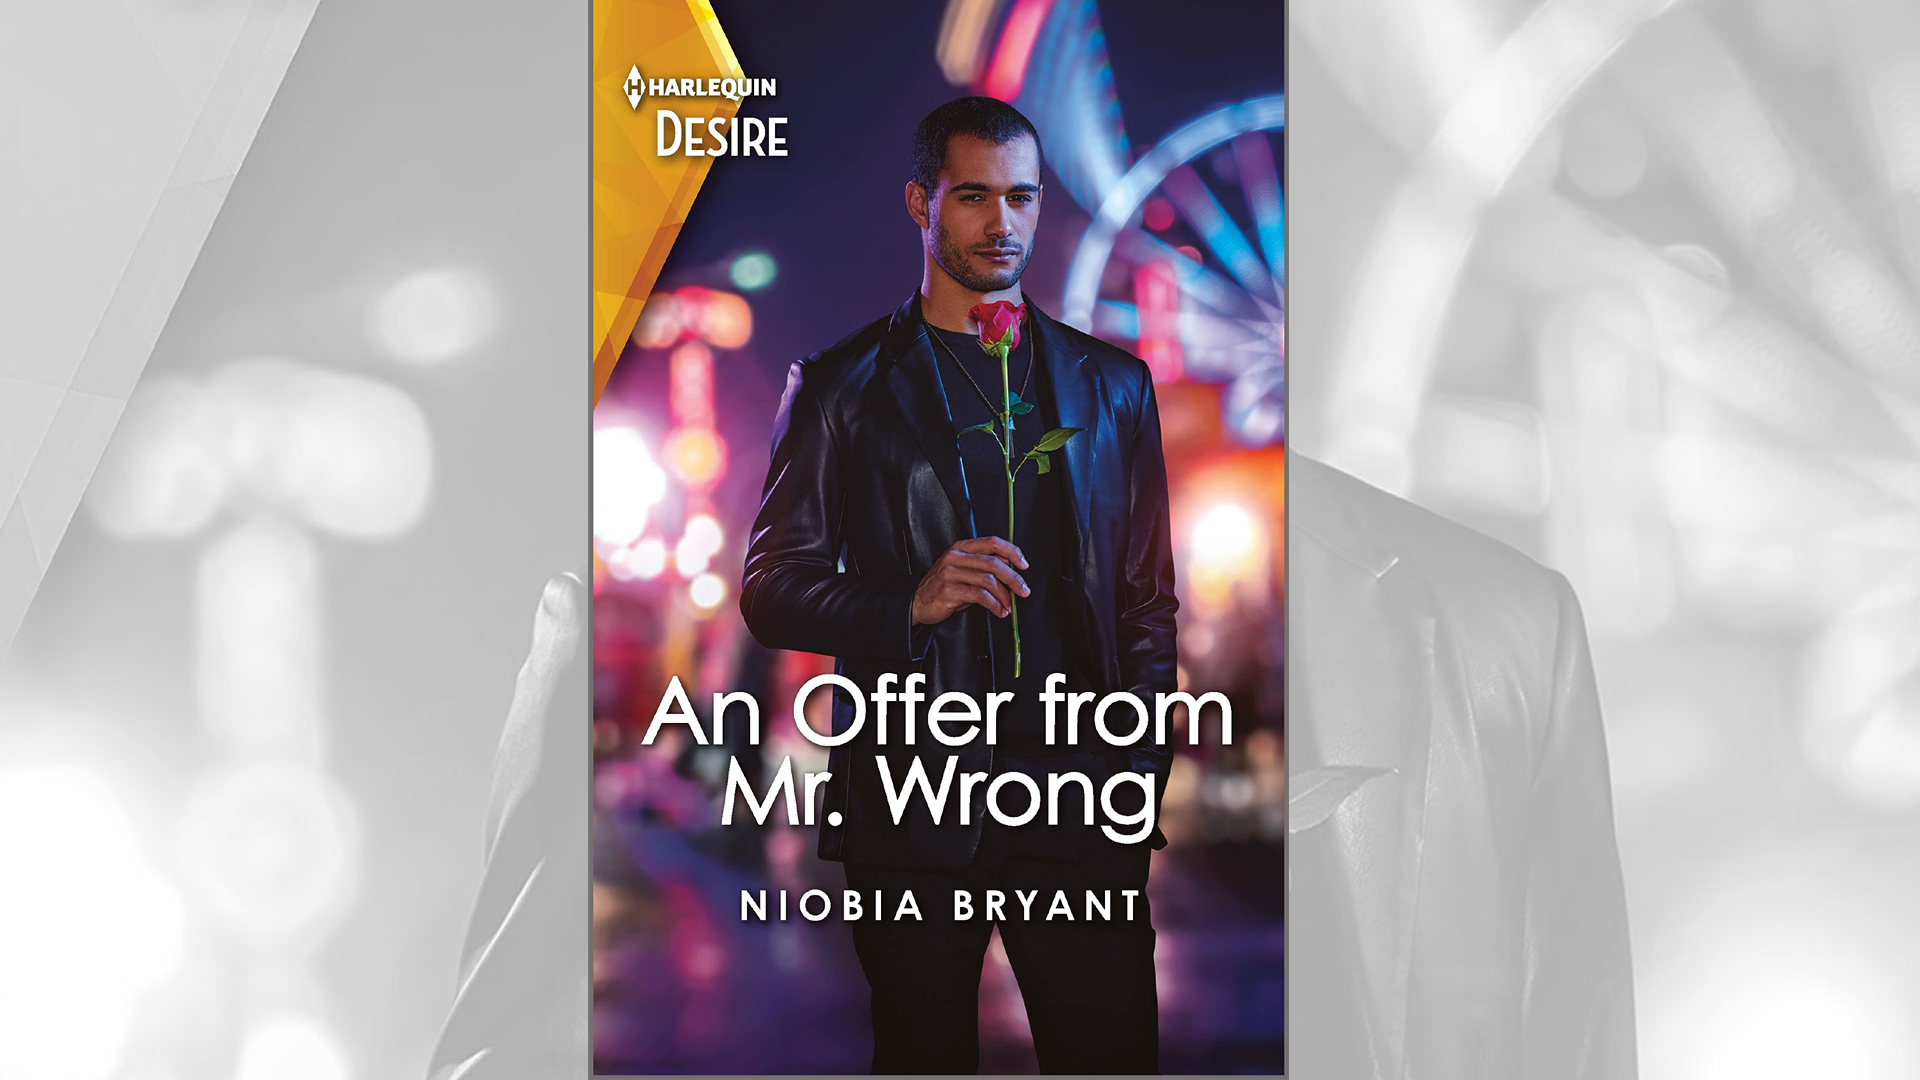 An Offer From Mr. Wrong by Niobia Bryant